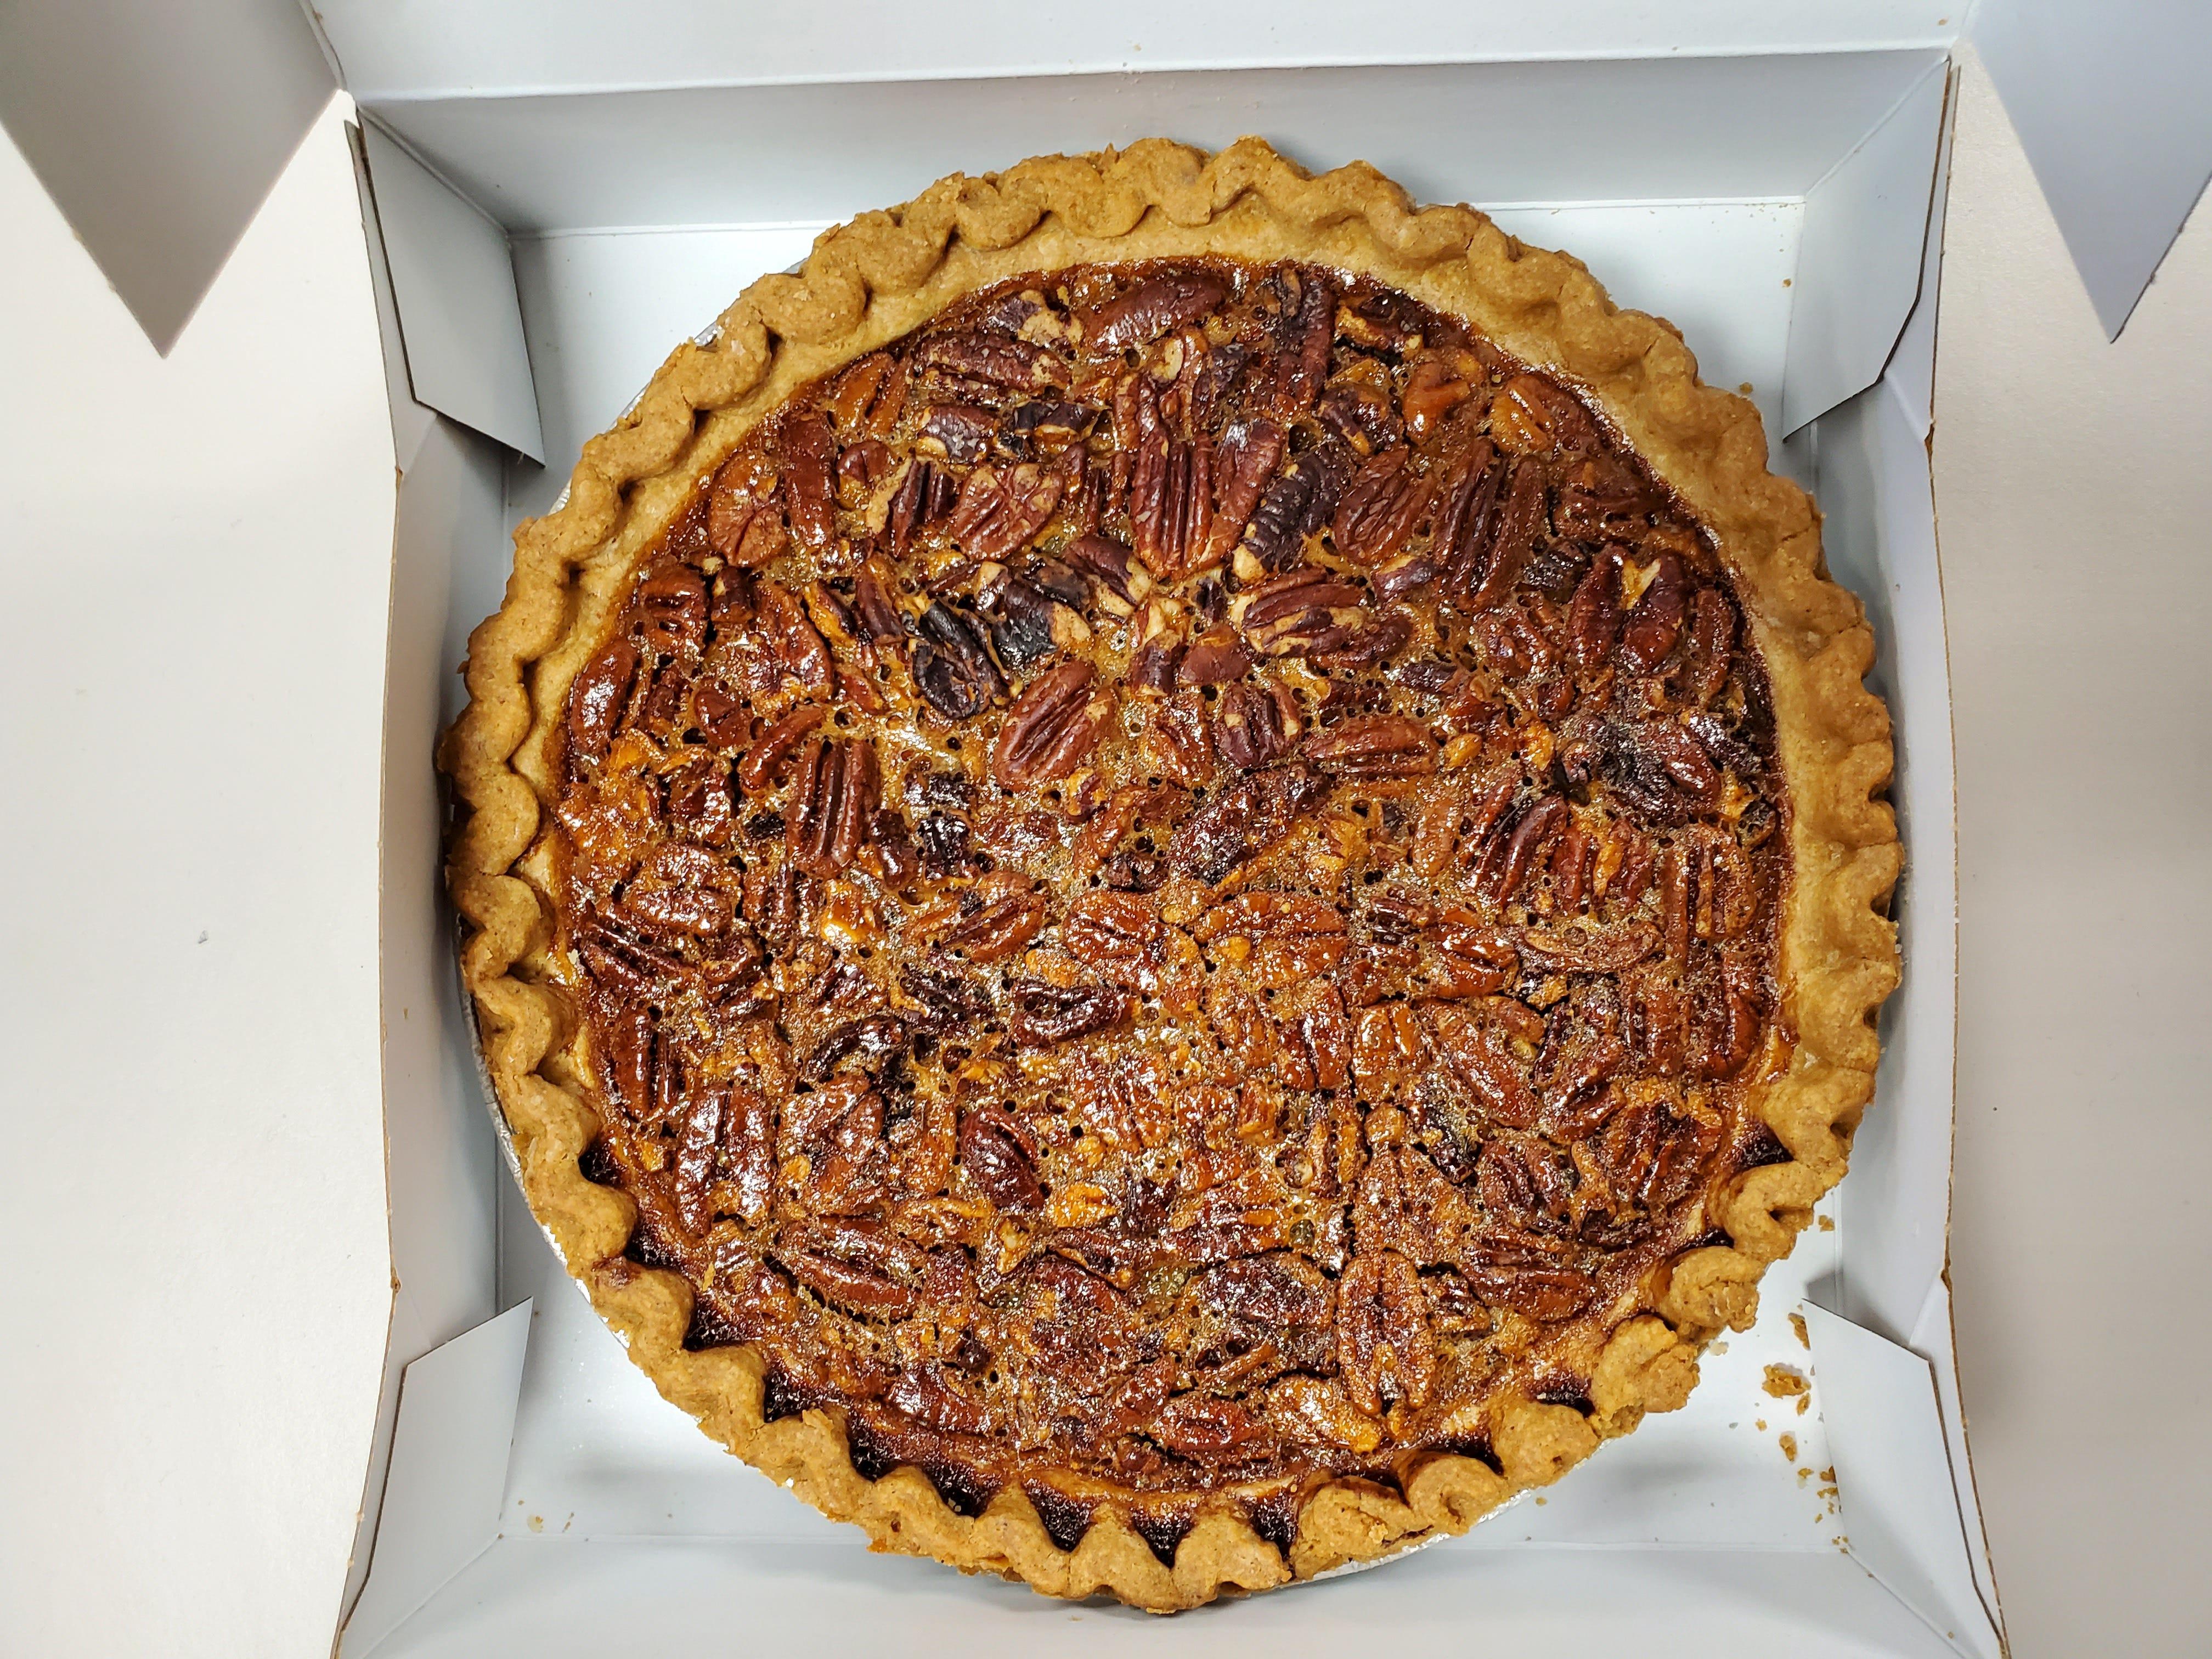 Pecan pie from Food Lion. $7.49 for a 22-ounce pie.